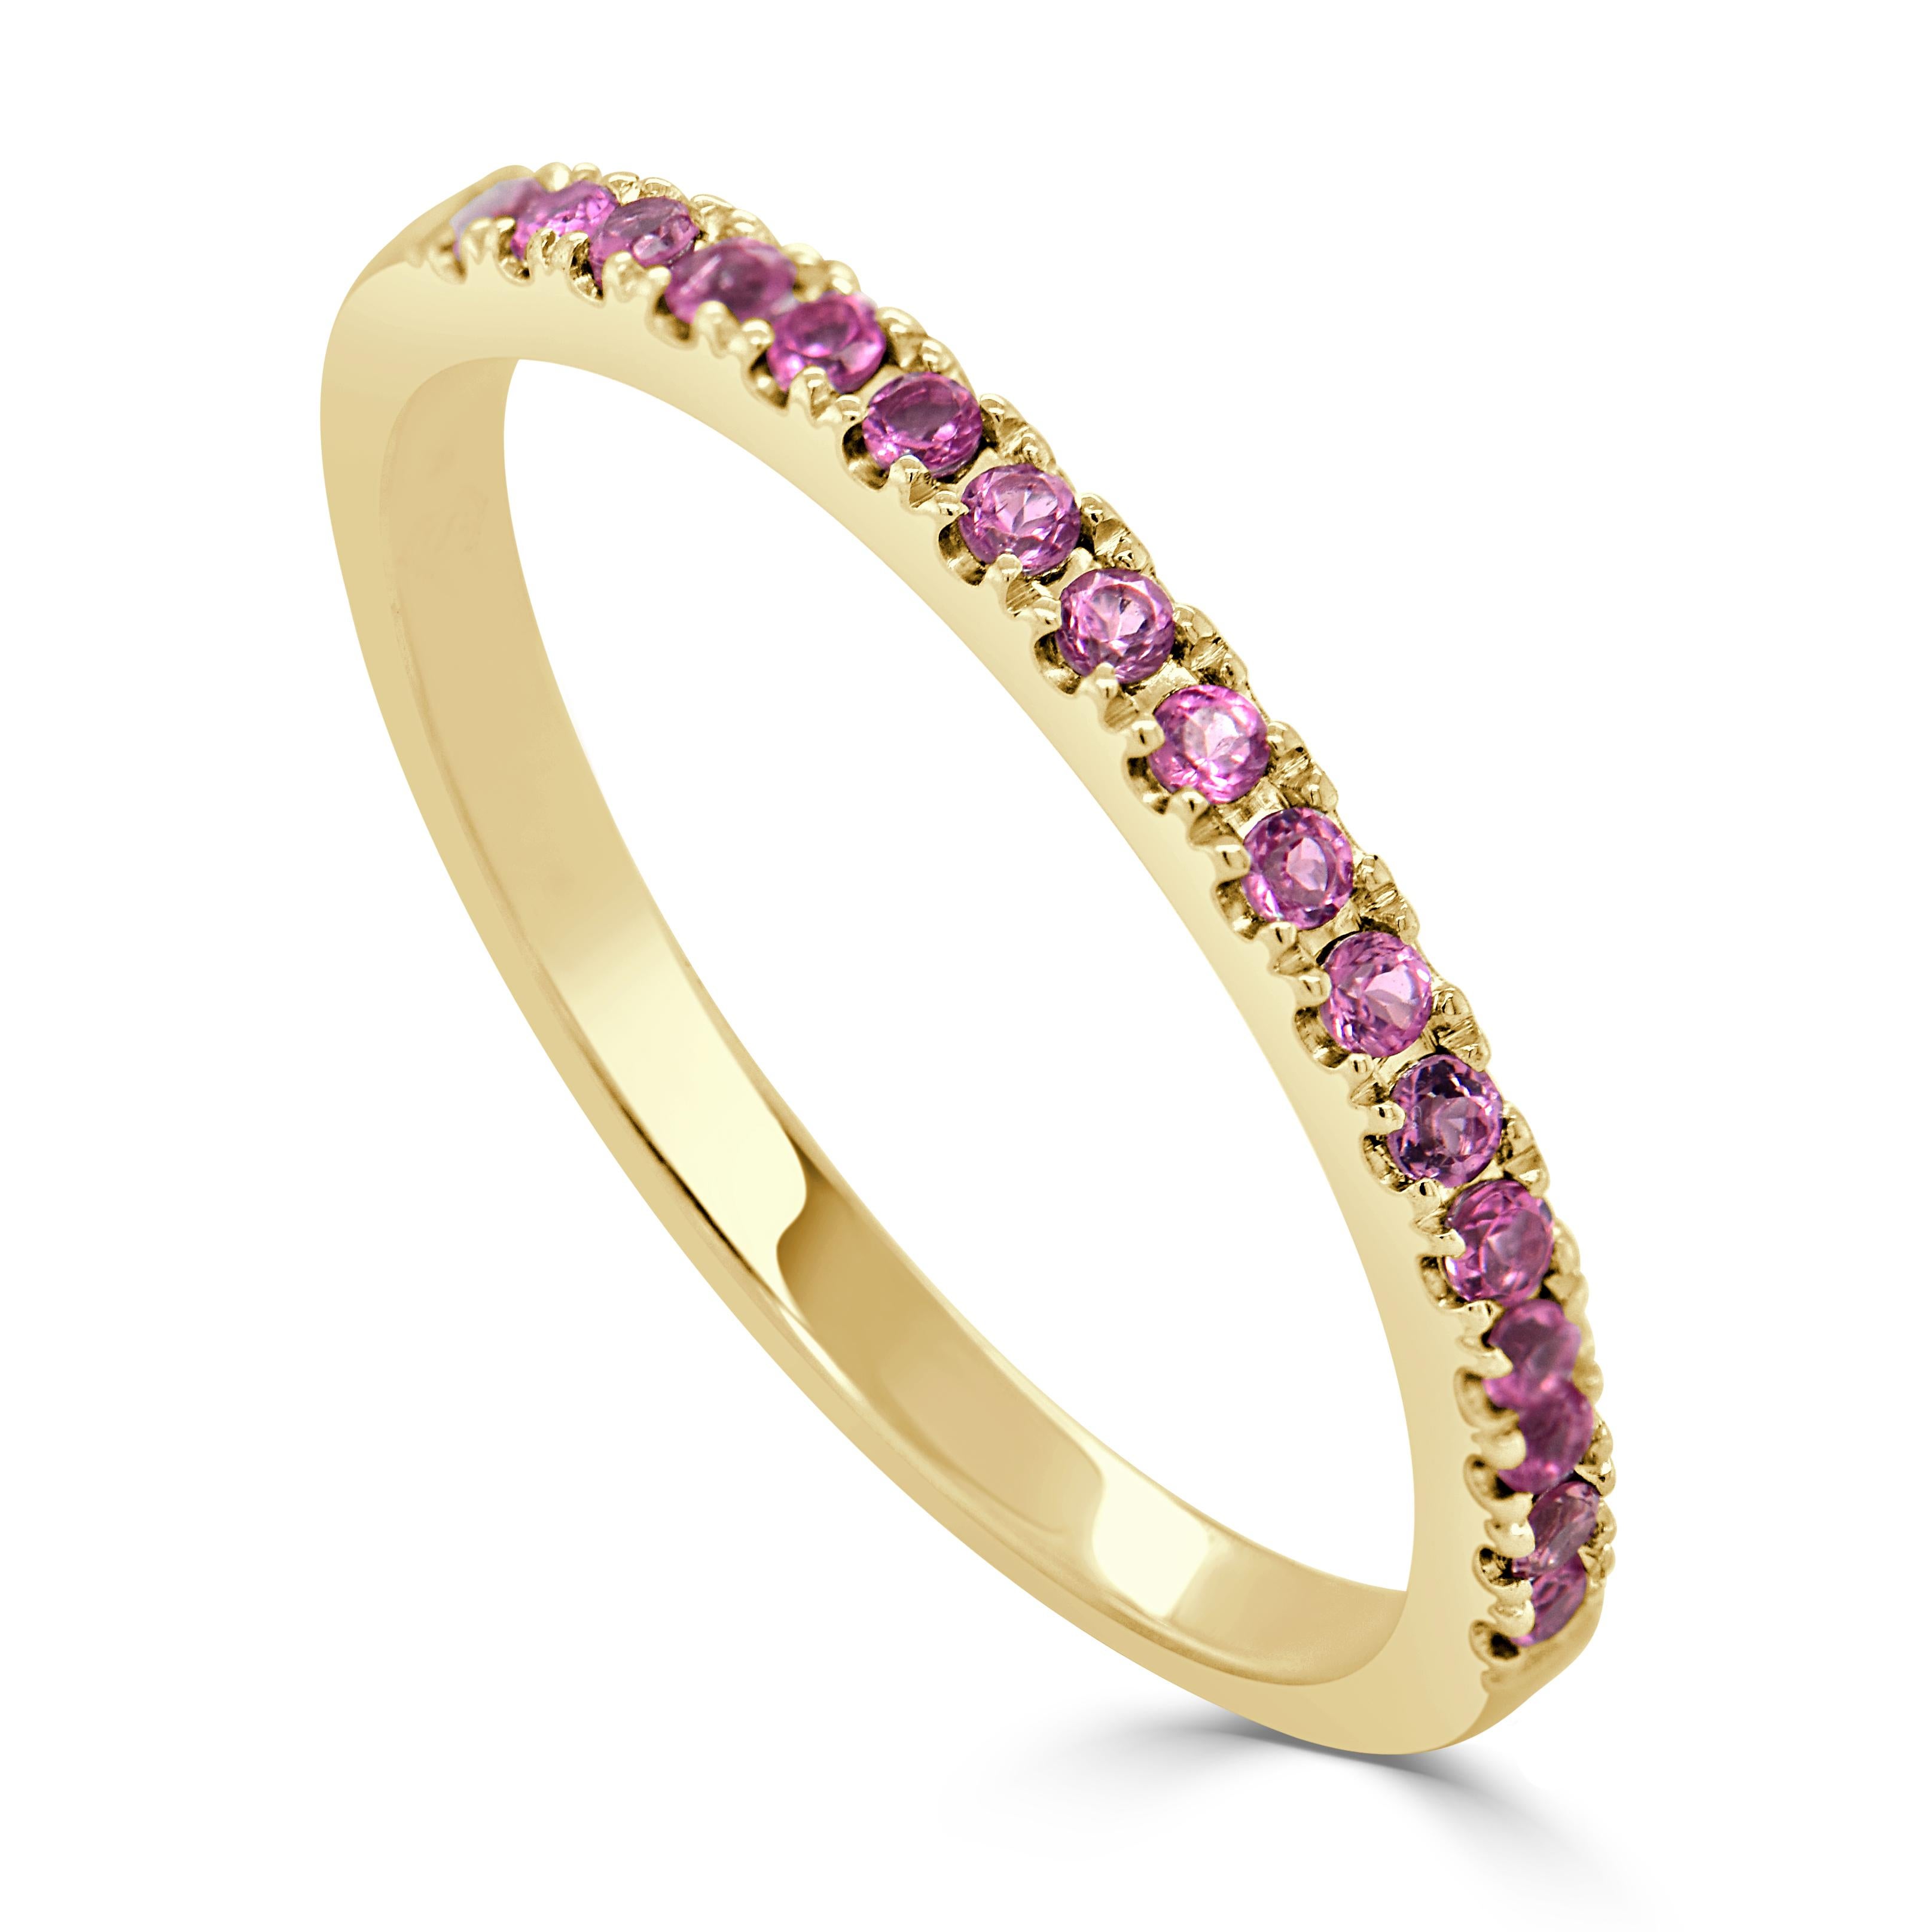 Charming Design - This stackable half-way around band is made of 14K gold and features round Pink Tourmoline approximately 0.17cts, available in  white, yellow and rose gold
 Measurements for ring size: The finger Size of this sapphire ring is 6.5